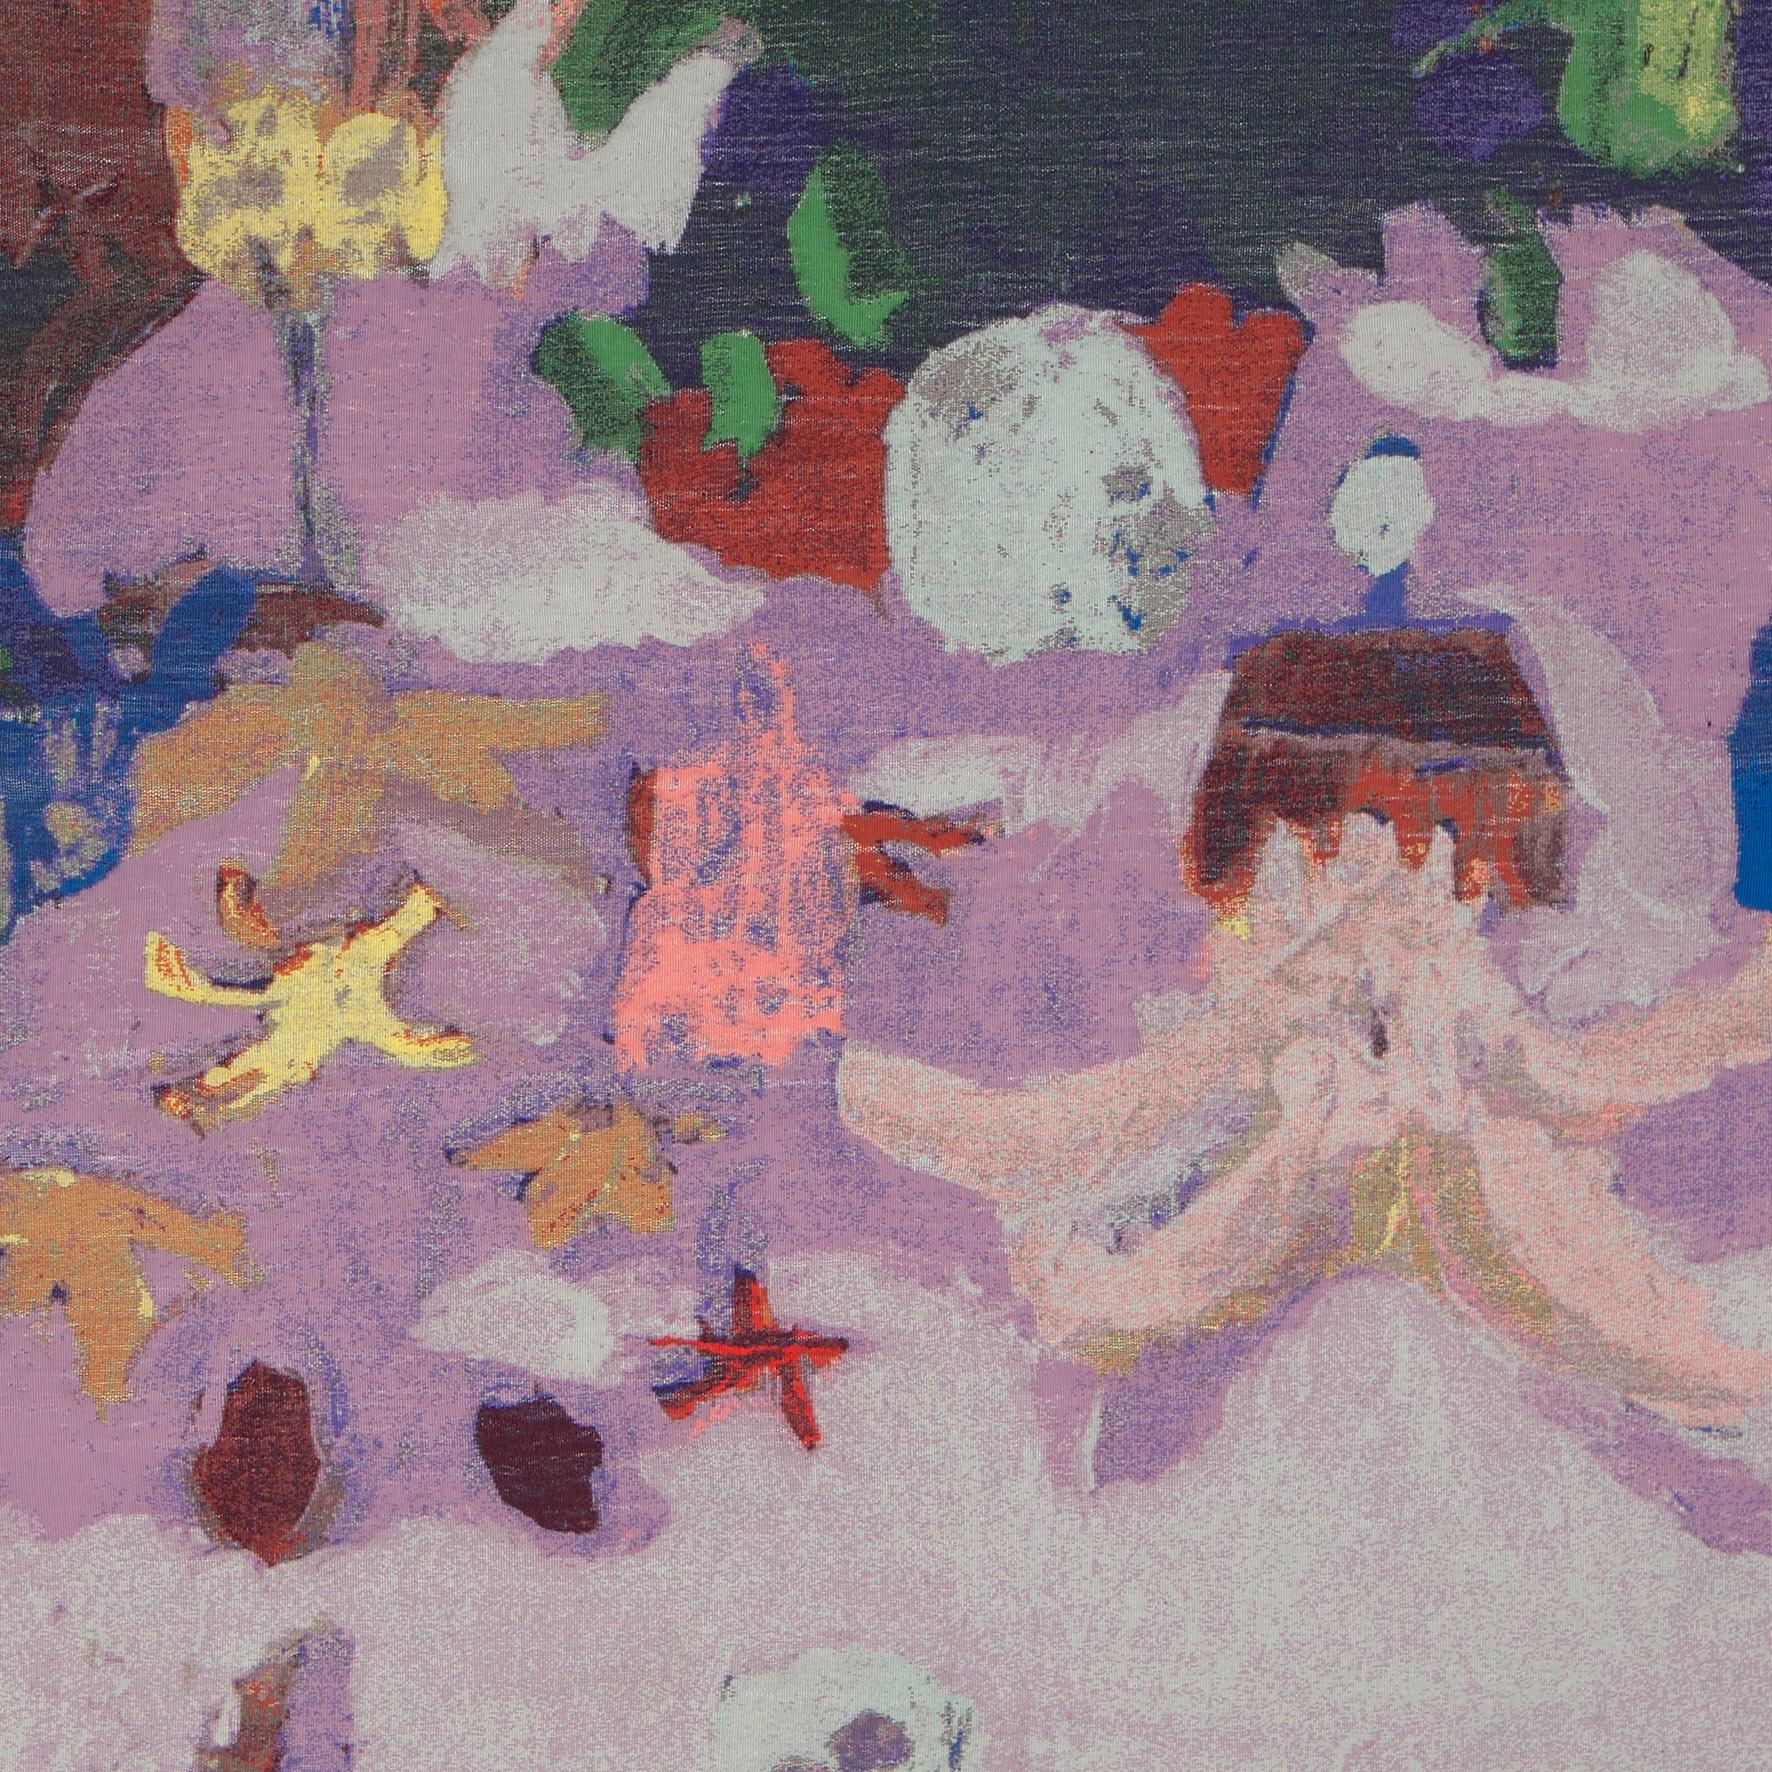 Maïlys Seydoux-Dumas, A Happy Stopover, Wool Tapestry, Néolice, 2021

A wool woven tapestry figuring various objects, flowers, starfish, teapot on a pink table on a blue background.
Woven in sixteen colors.
Signed on the lower right.
Numbered EA1